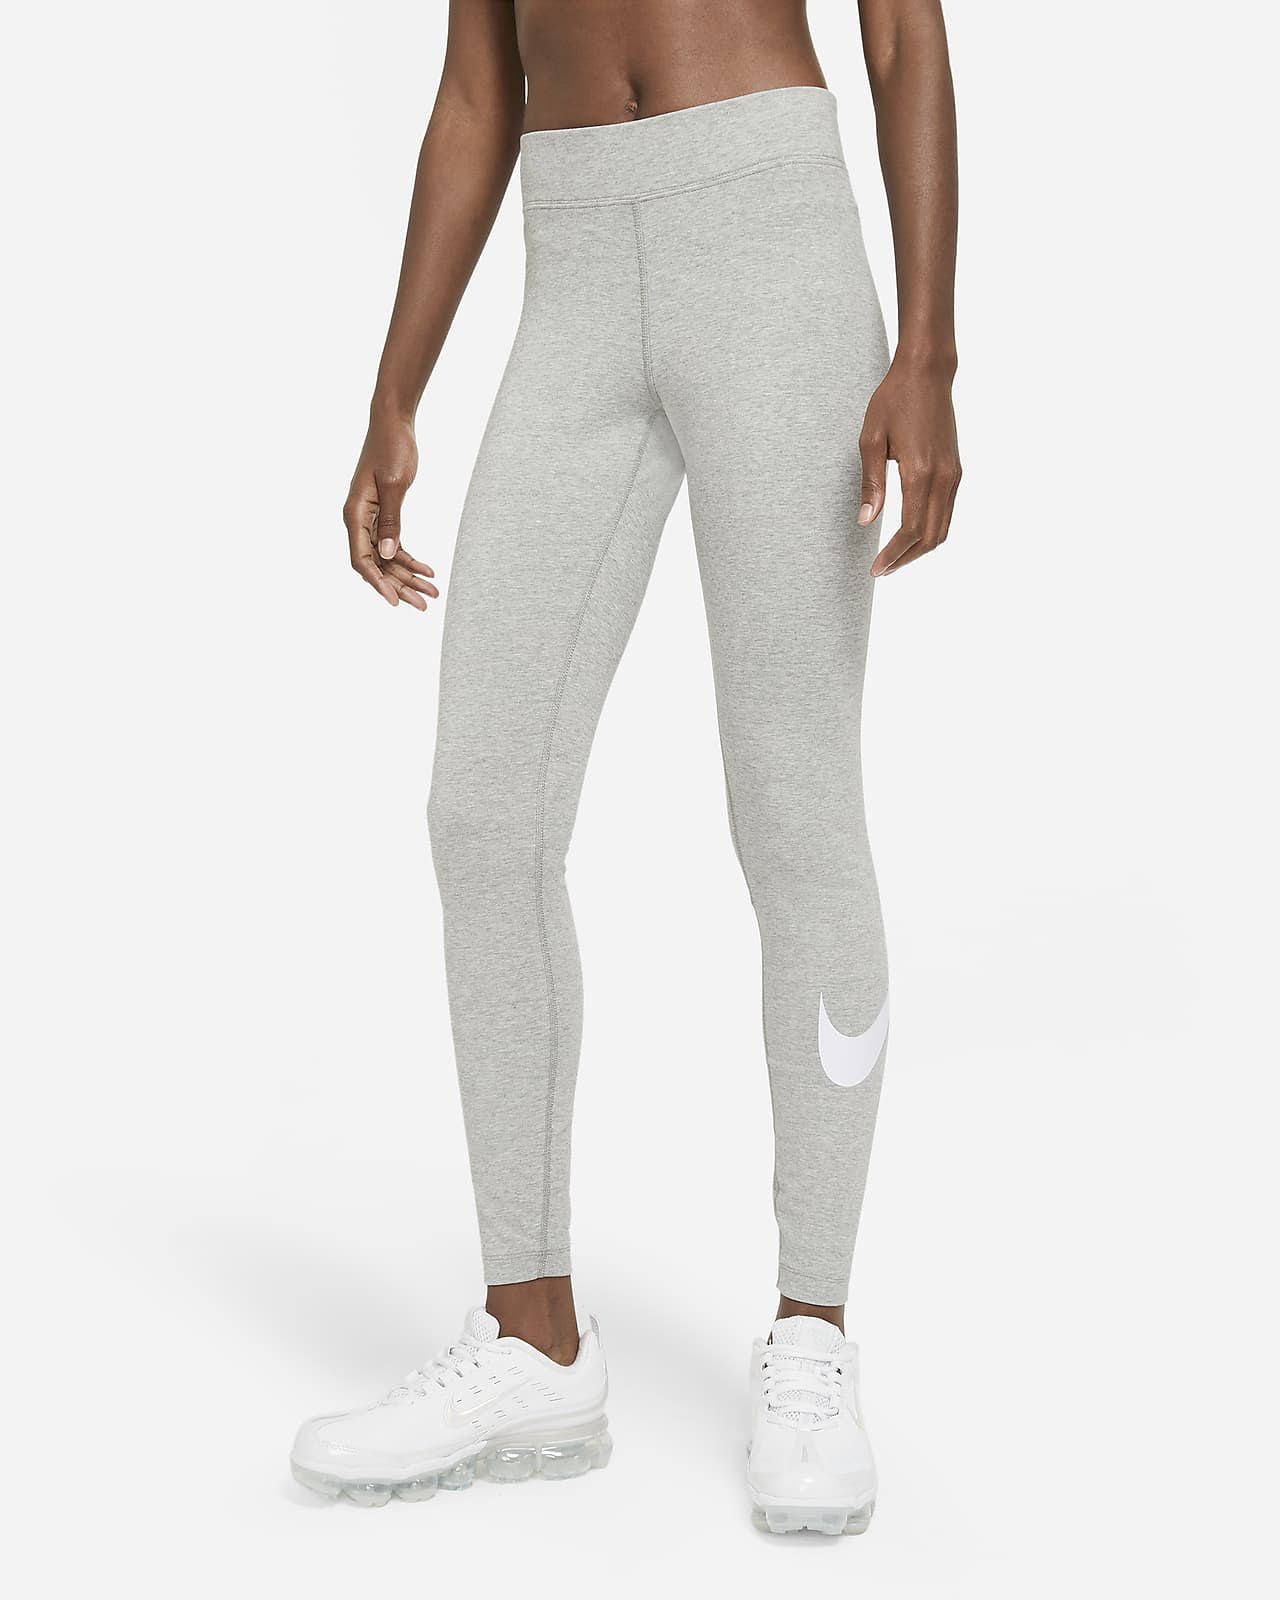 https://static.nike.com/a/images/t_PDP_1280_v1/f_auto,q_auto:eco/79fdfde5-e4df-4752-ae0b-68d1bcaaaccf/sportswear-essential-legging-met-halfhoge-taille-en-swoosh-dames-XnjHdT.png